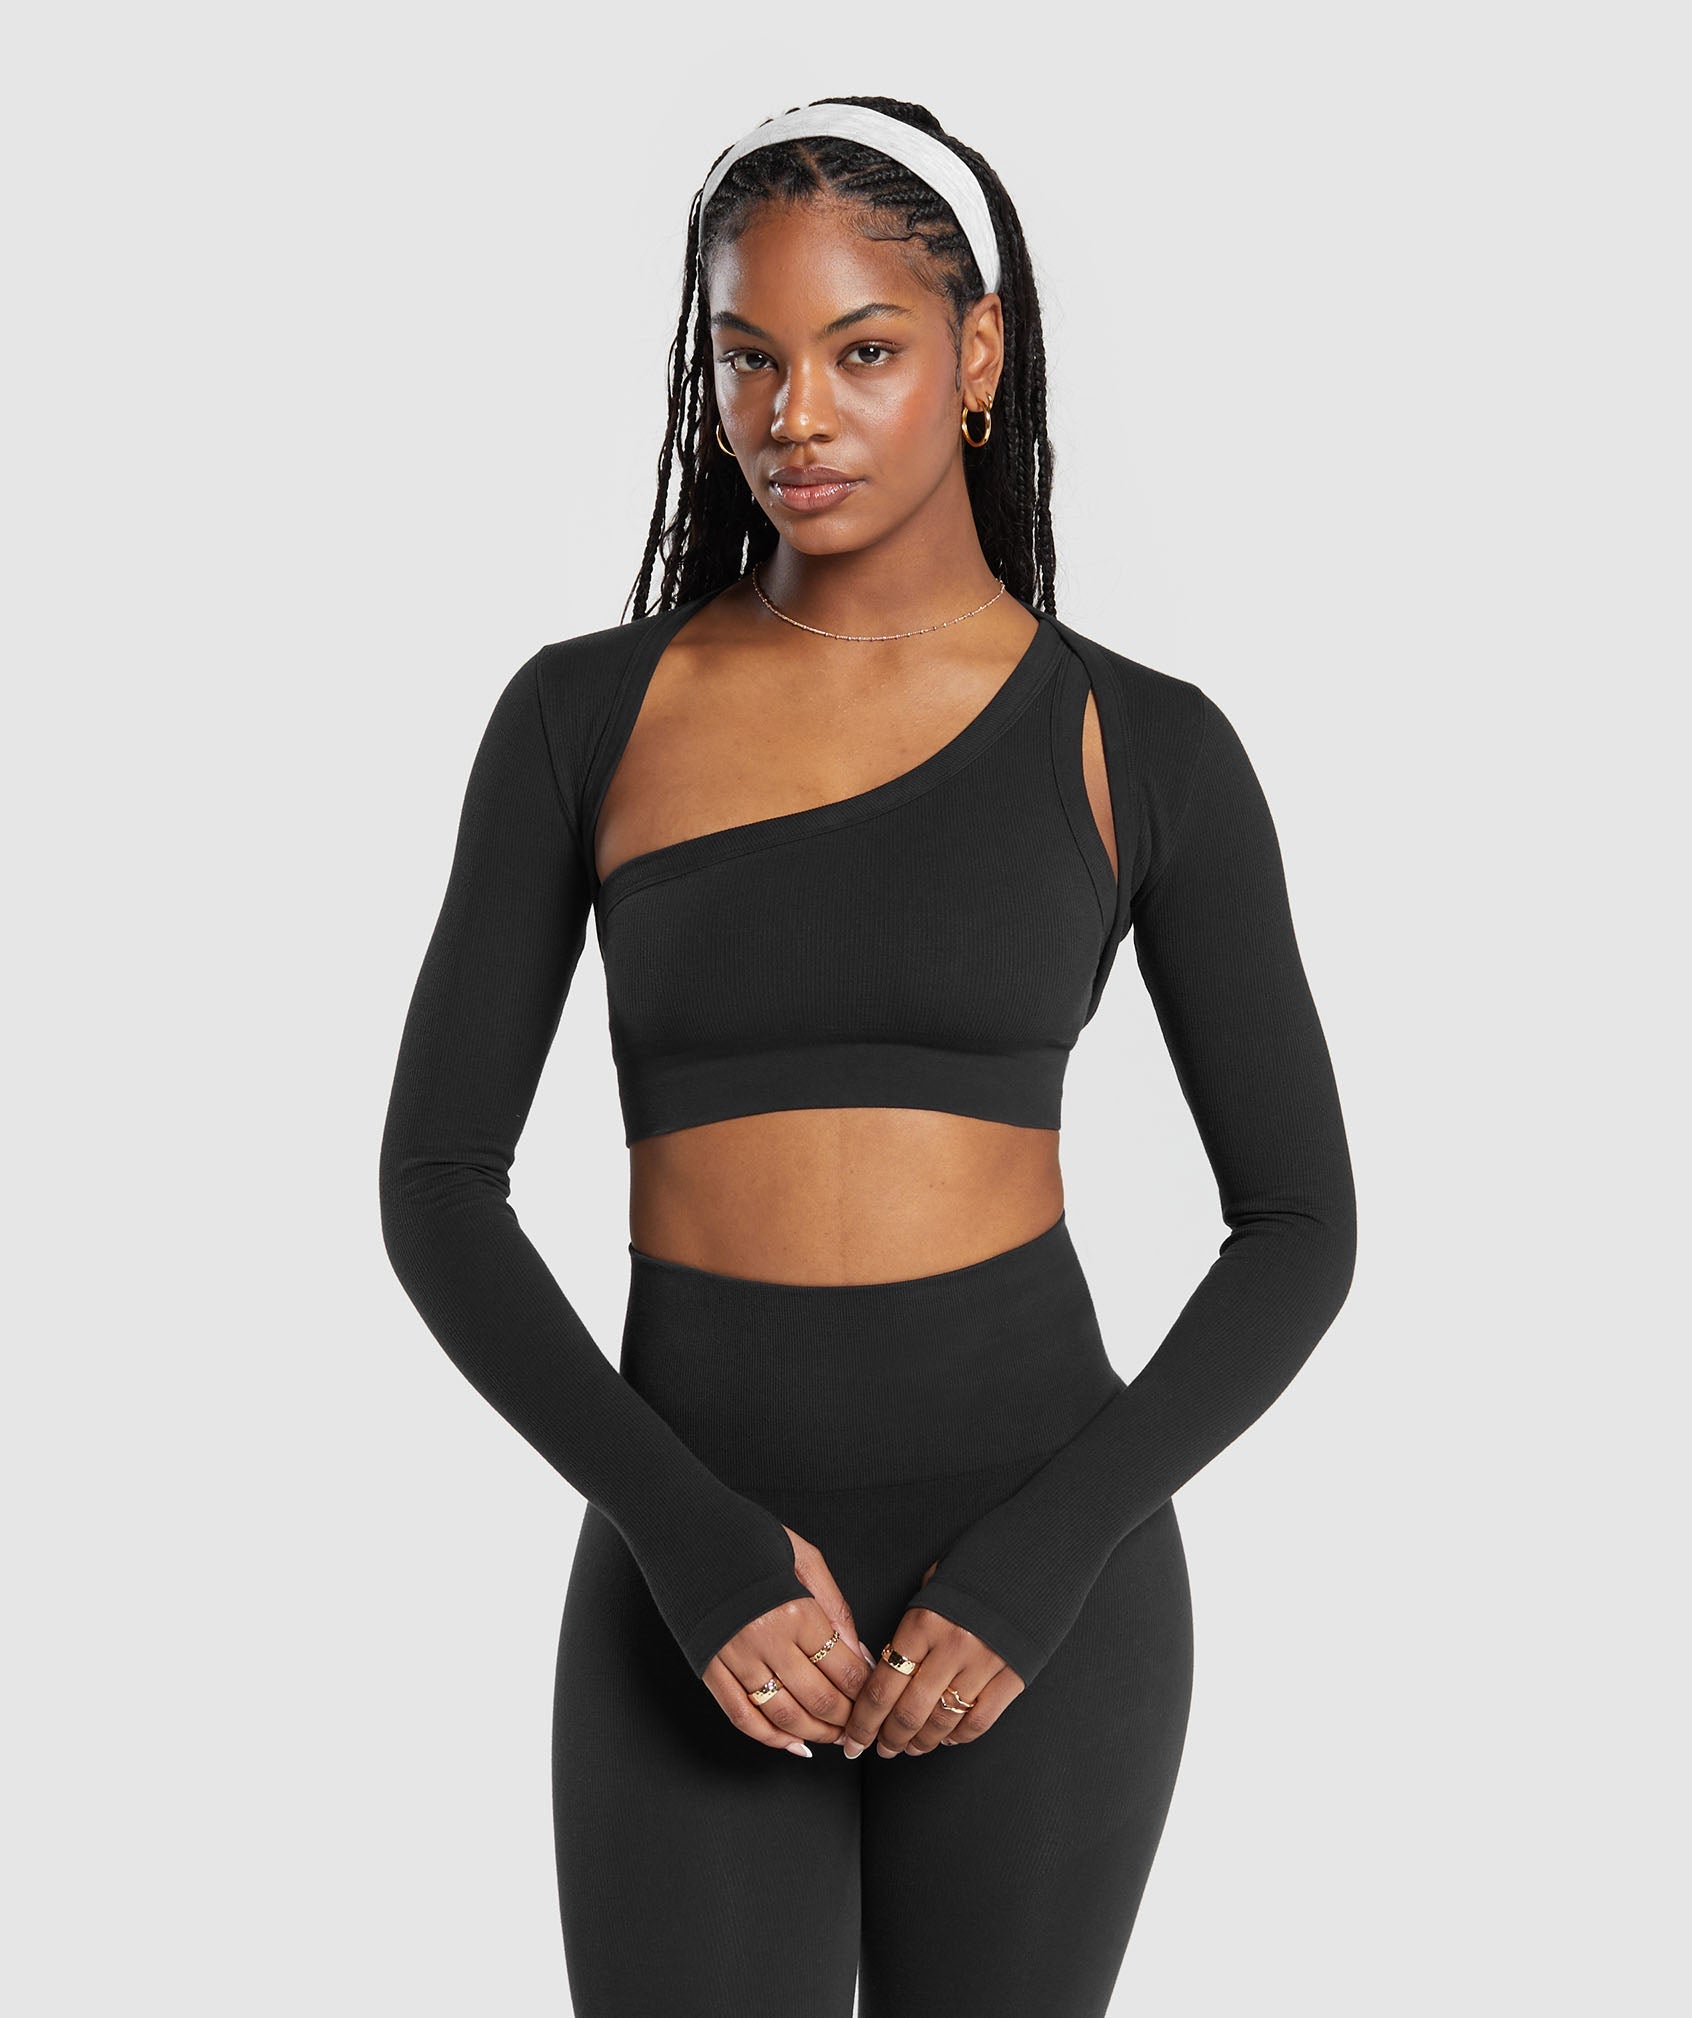 Black Gymshark Outfit Xs